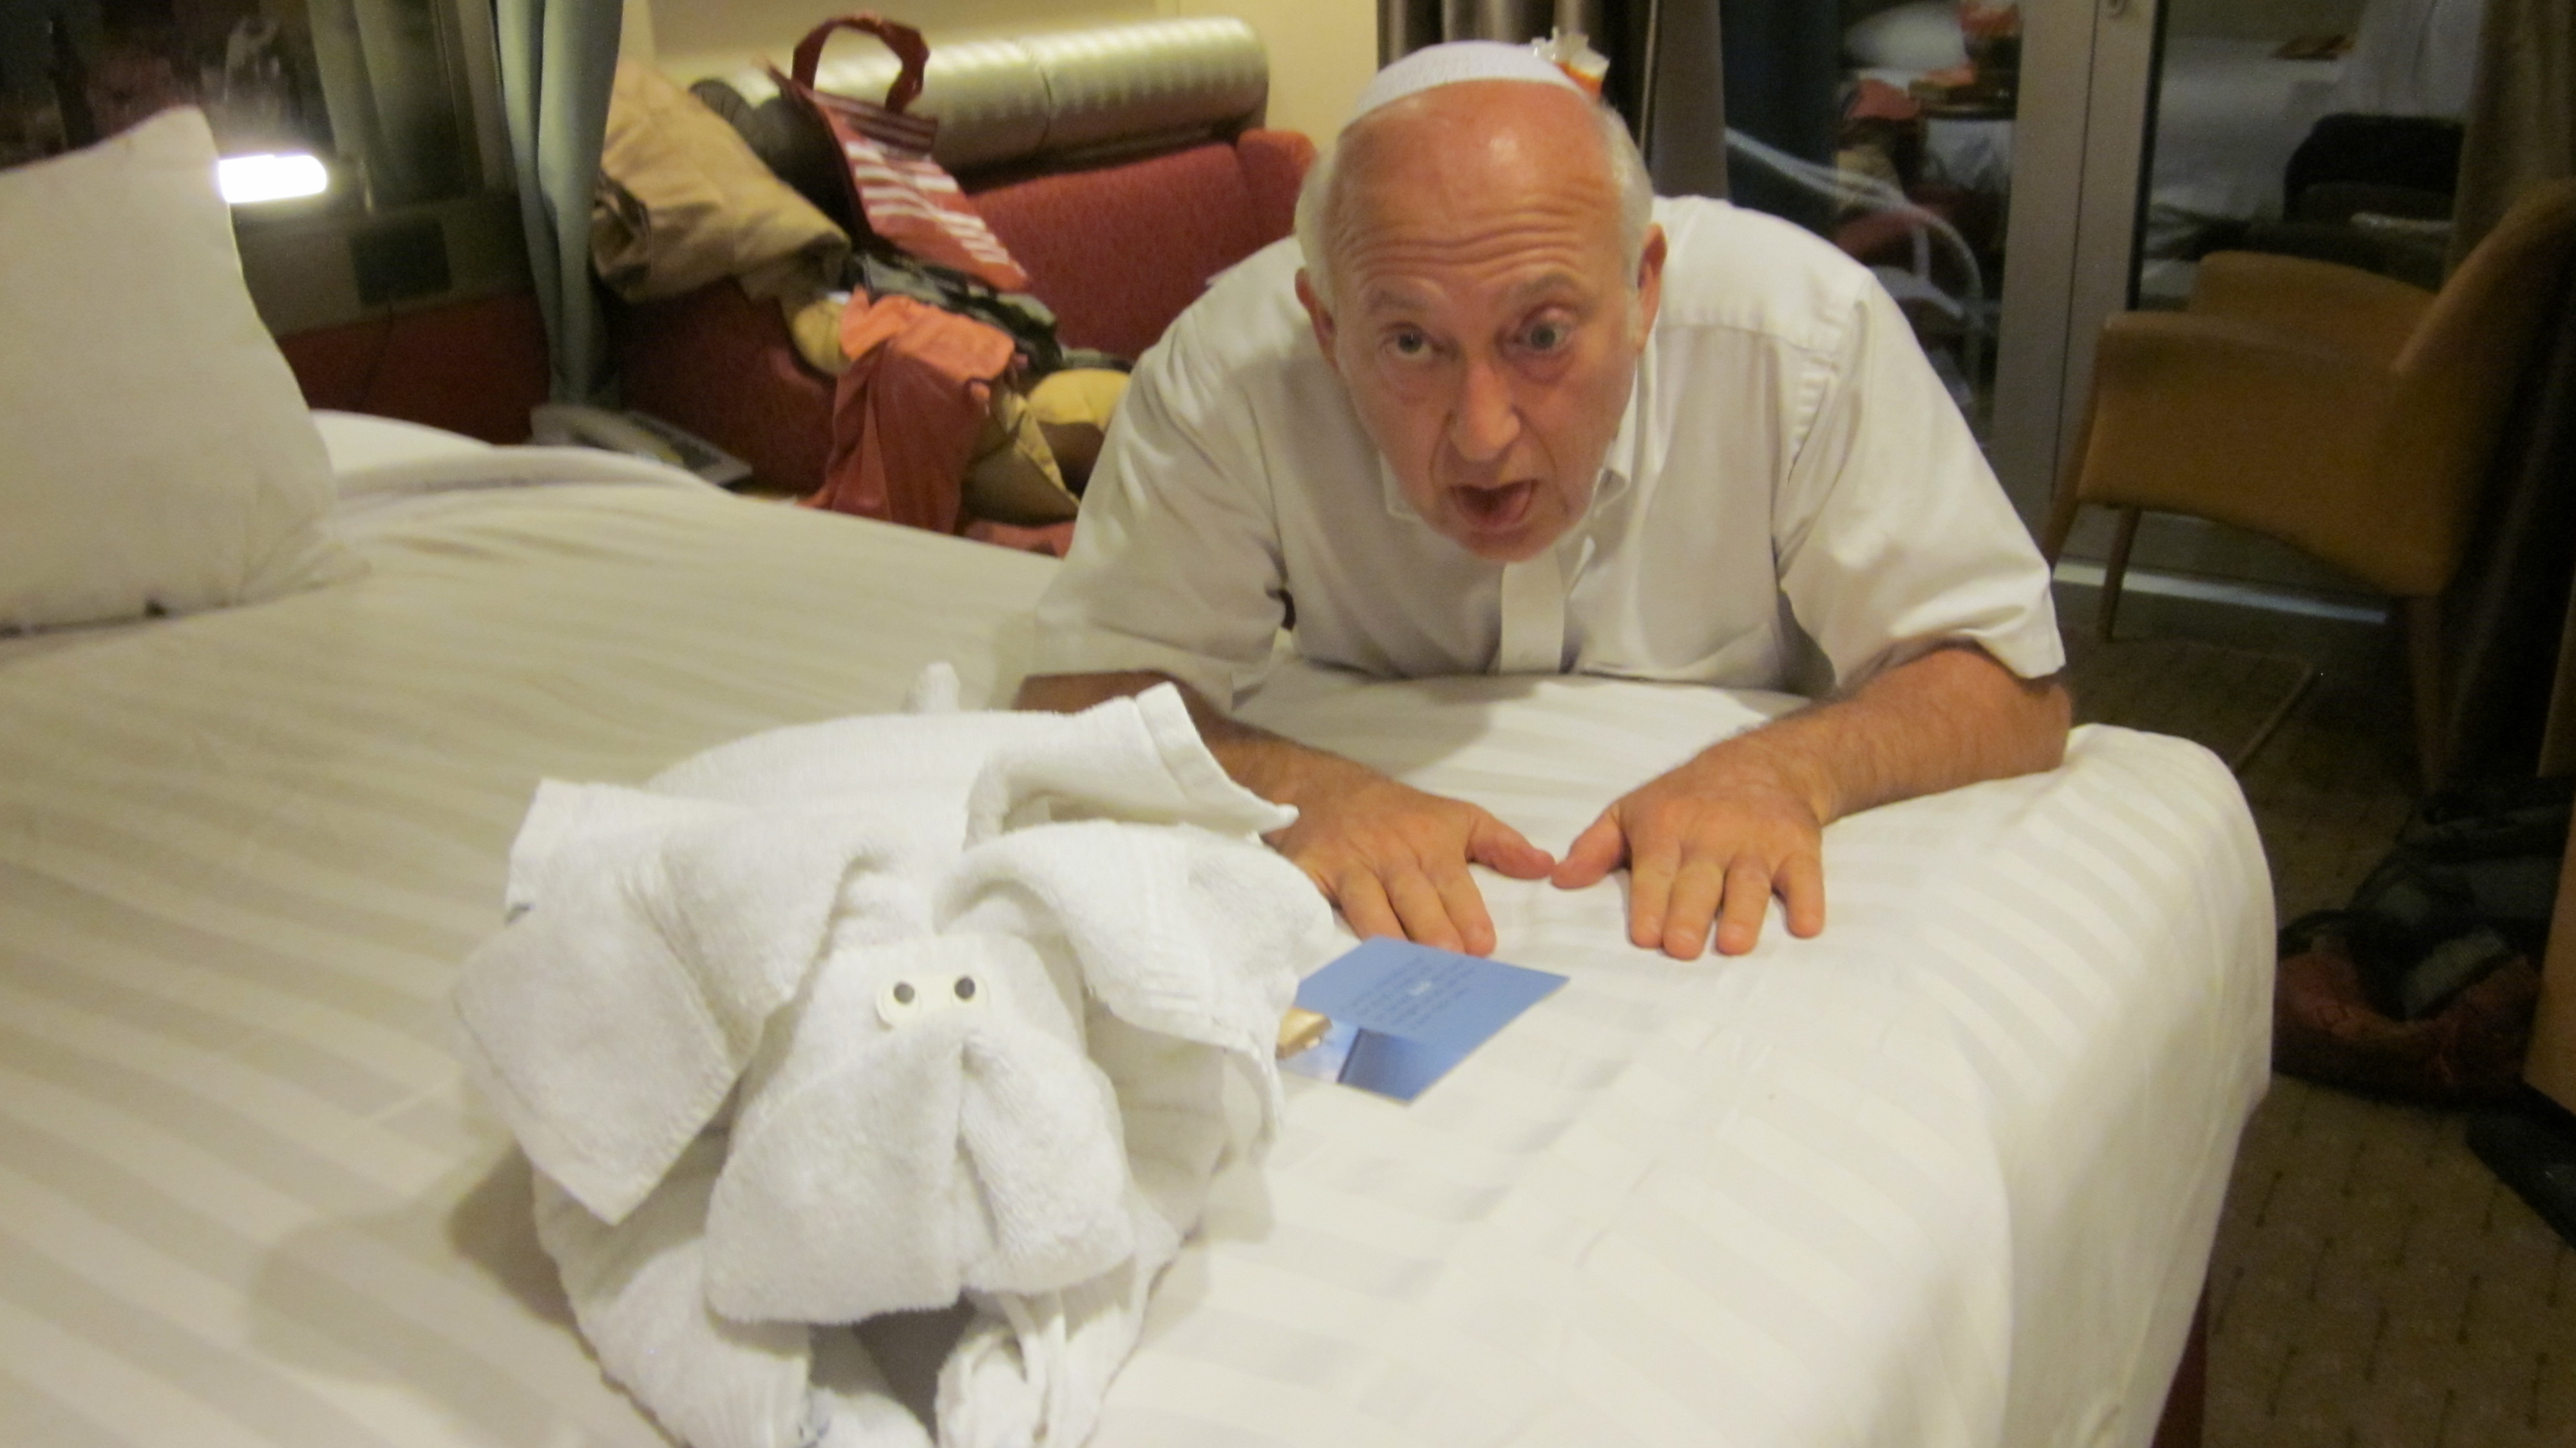 Mike and the Towel Animal